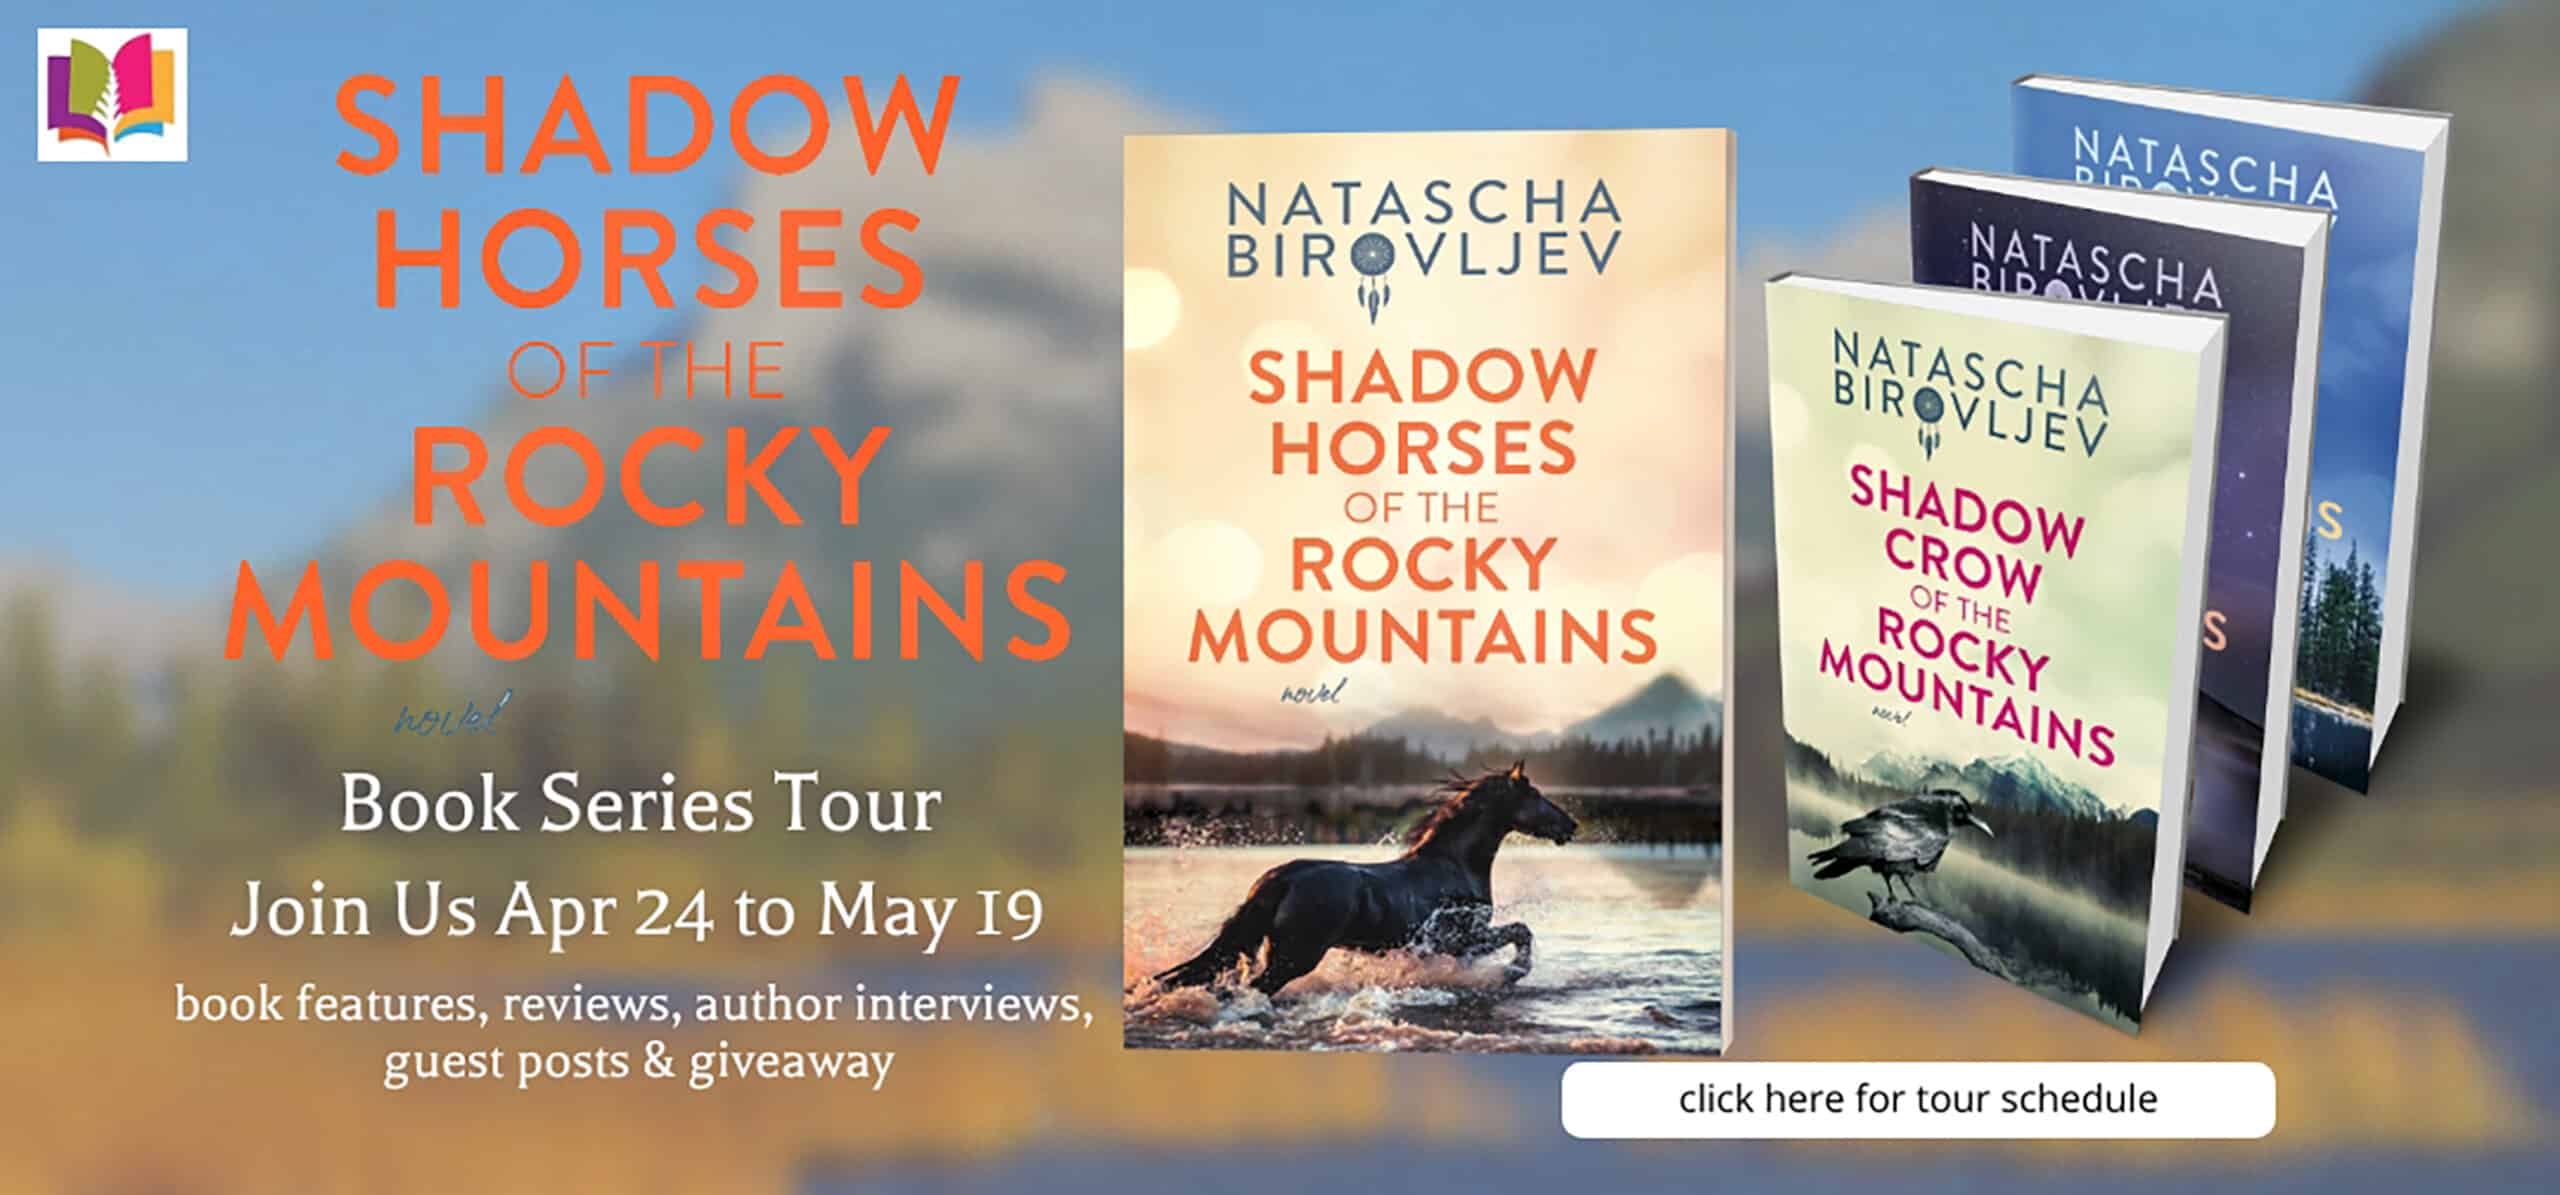 Shadow Horses of the Rocky Mountains by Natascha Birovljev (Willow Ranch #1) | A Guest Post about Pen Names ~ Fascinating Tale